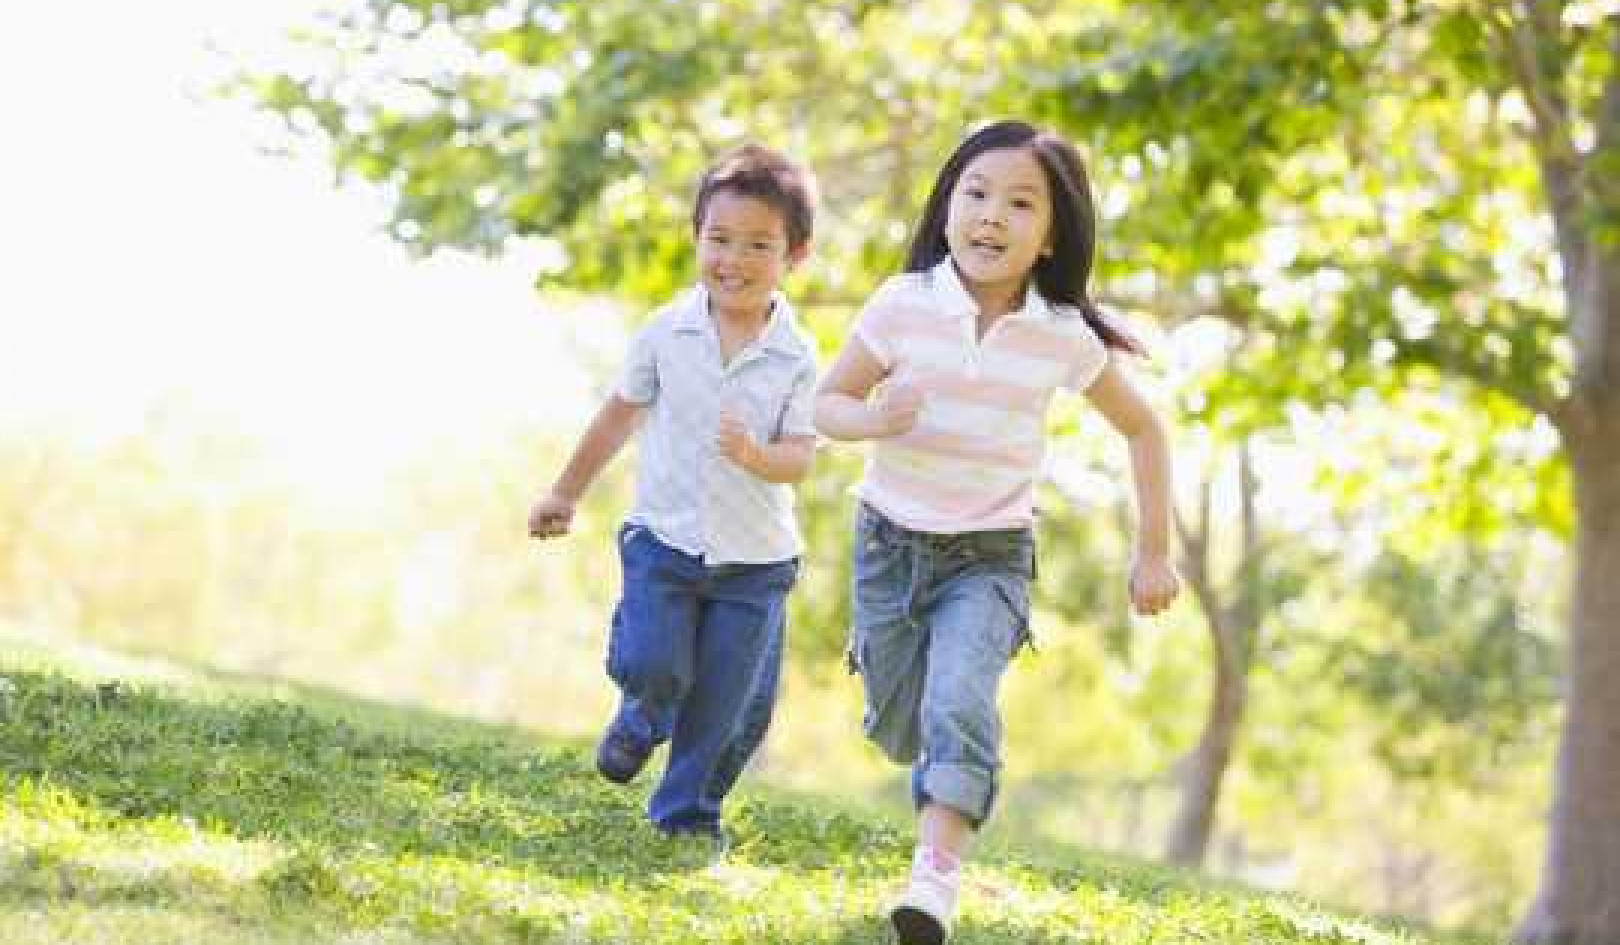 Why Outdoor Play Is The Best Medicine For Children